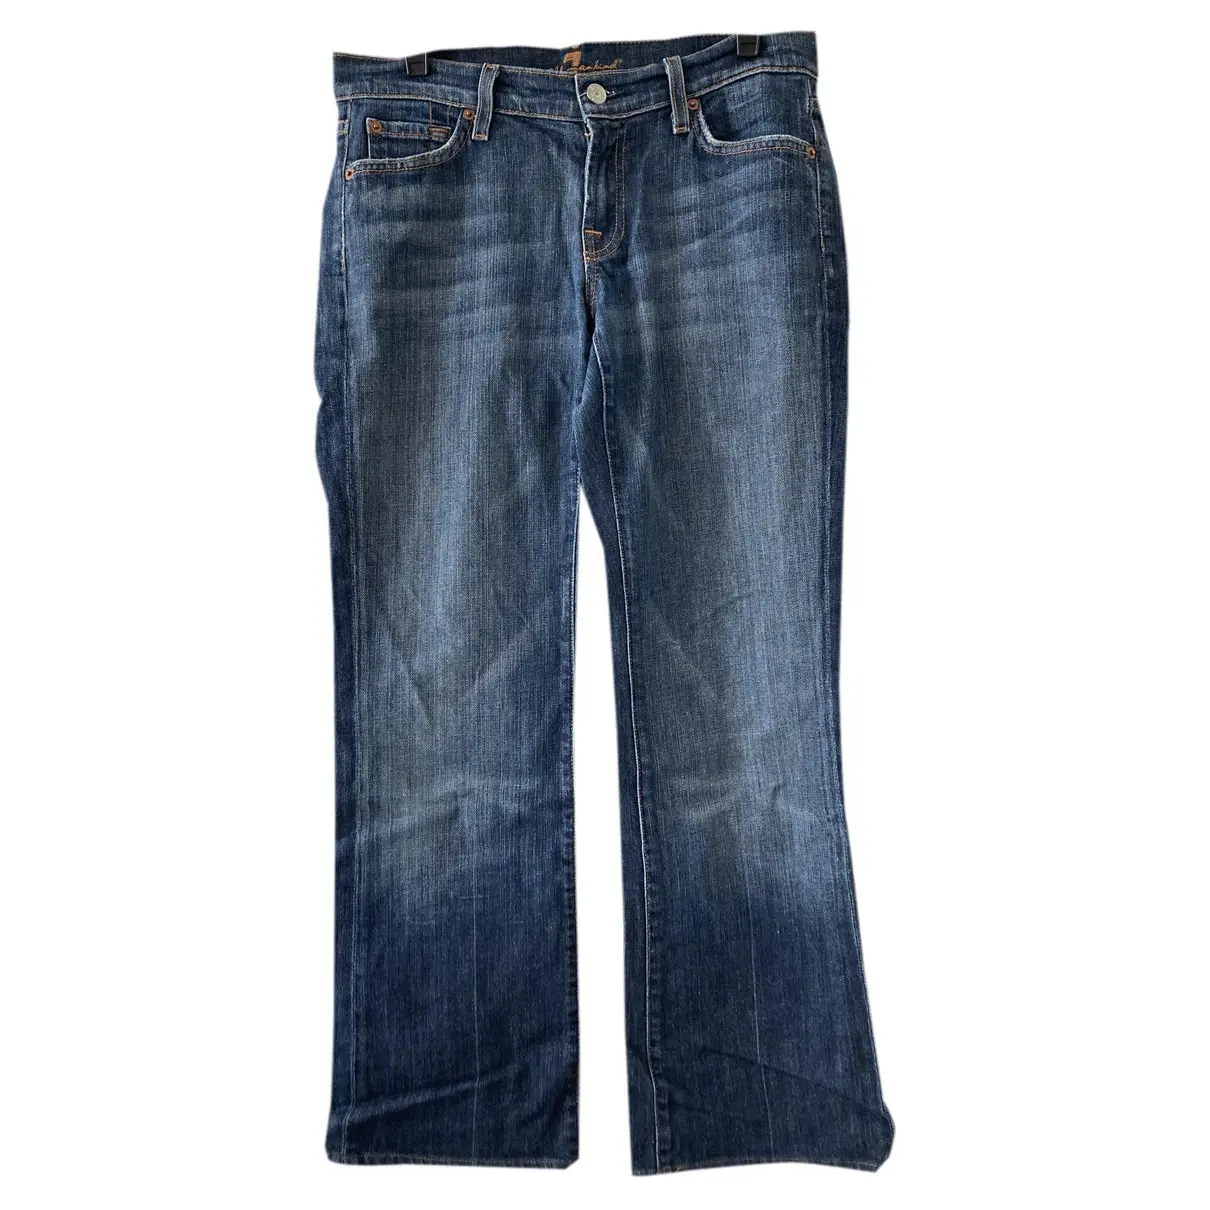 Blue Denim - Jeans Jeans 7 For All Mankind